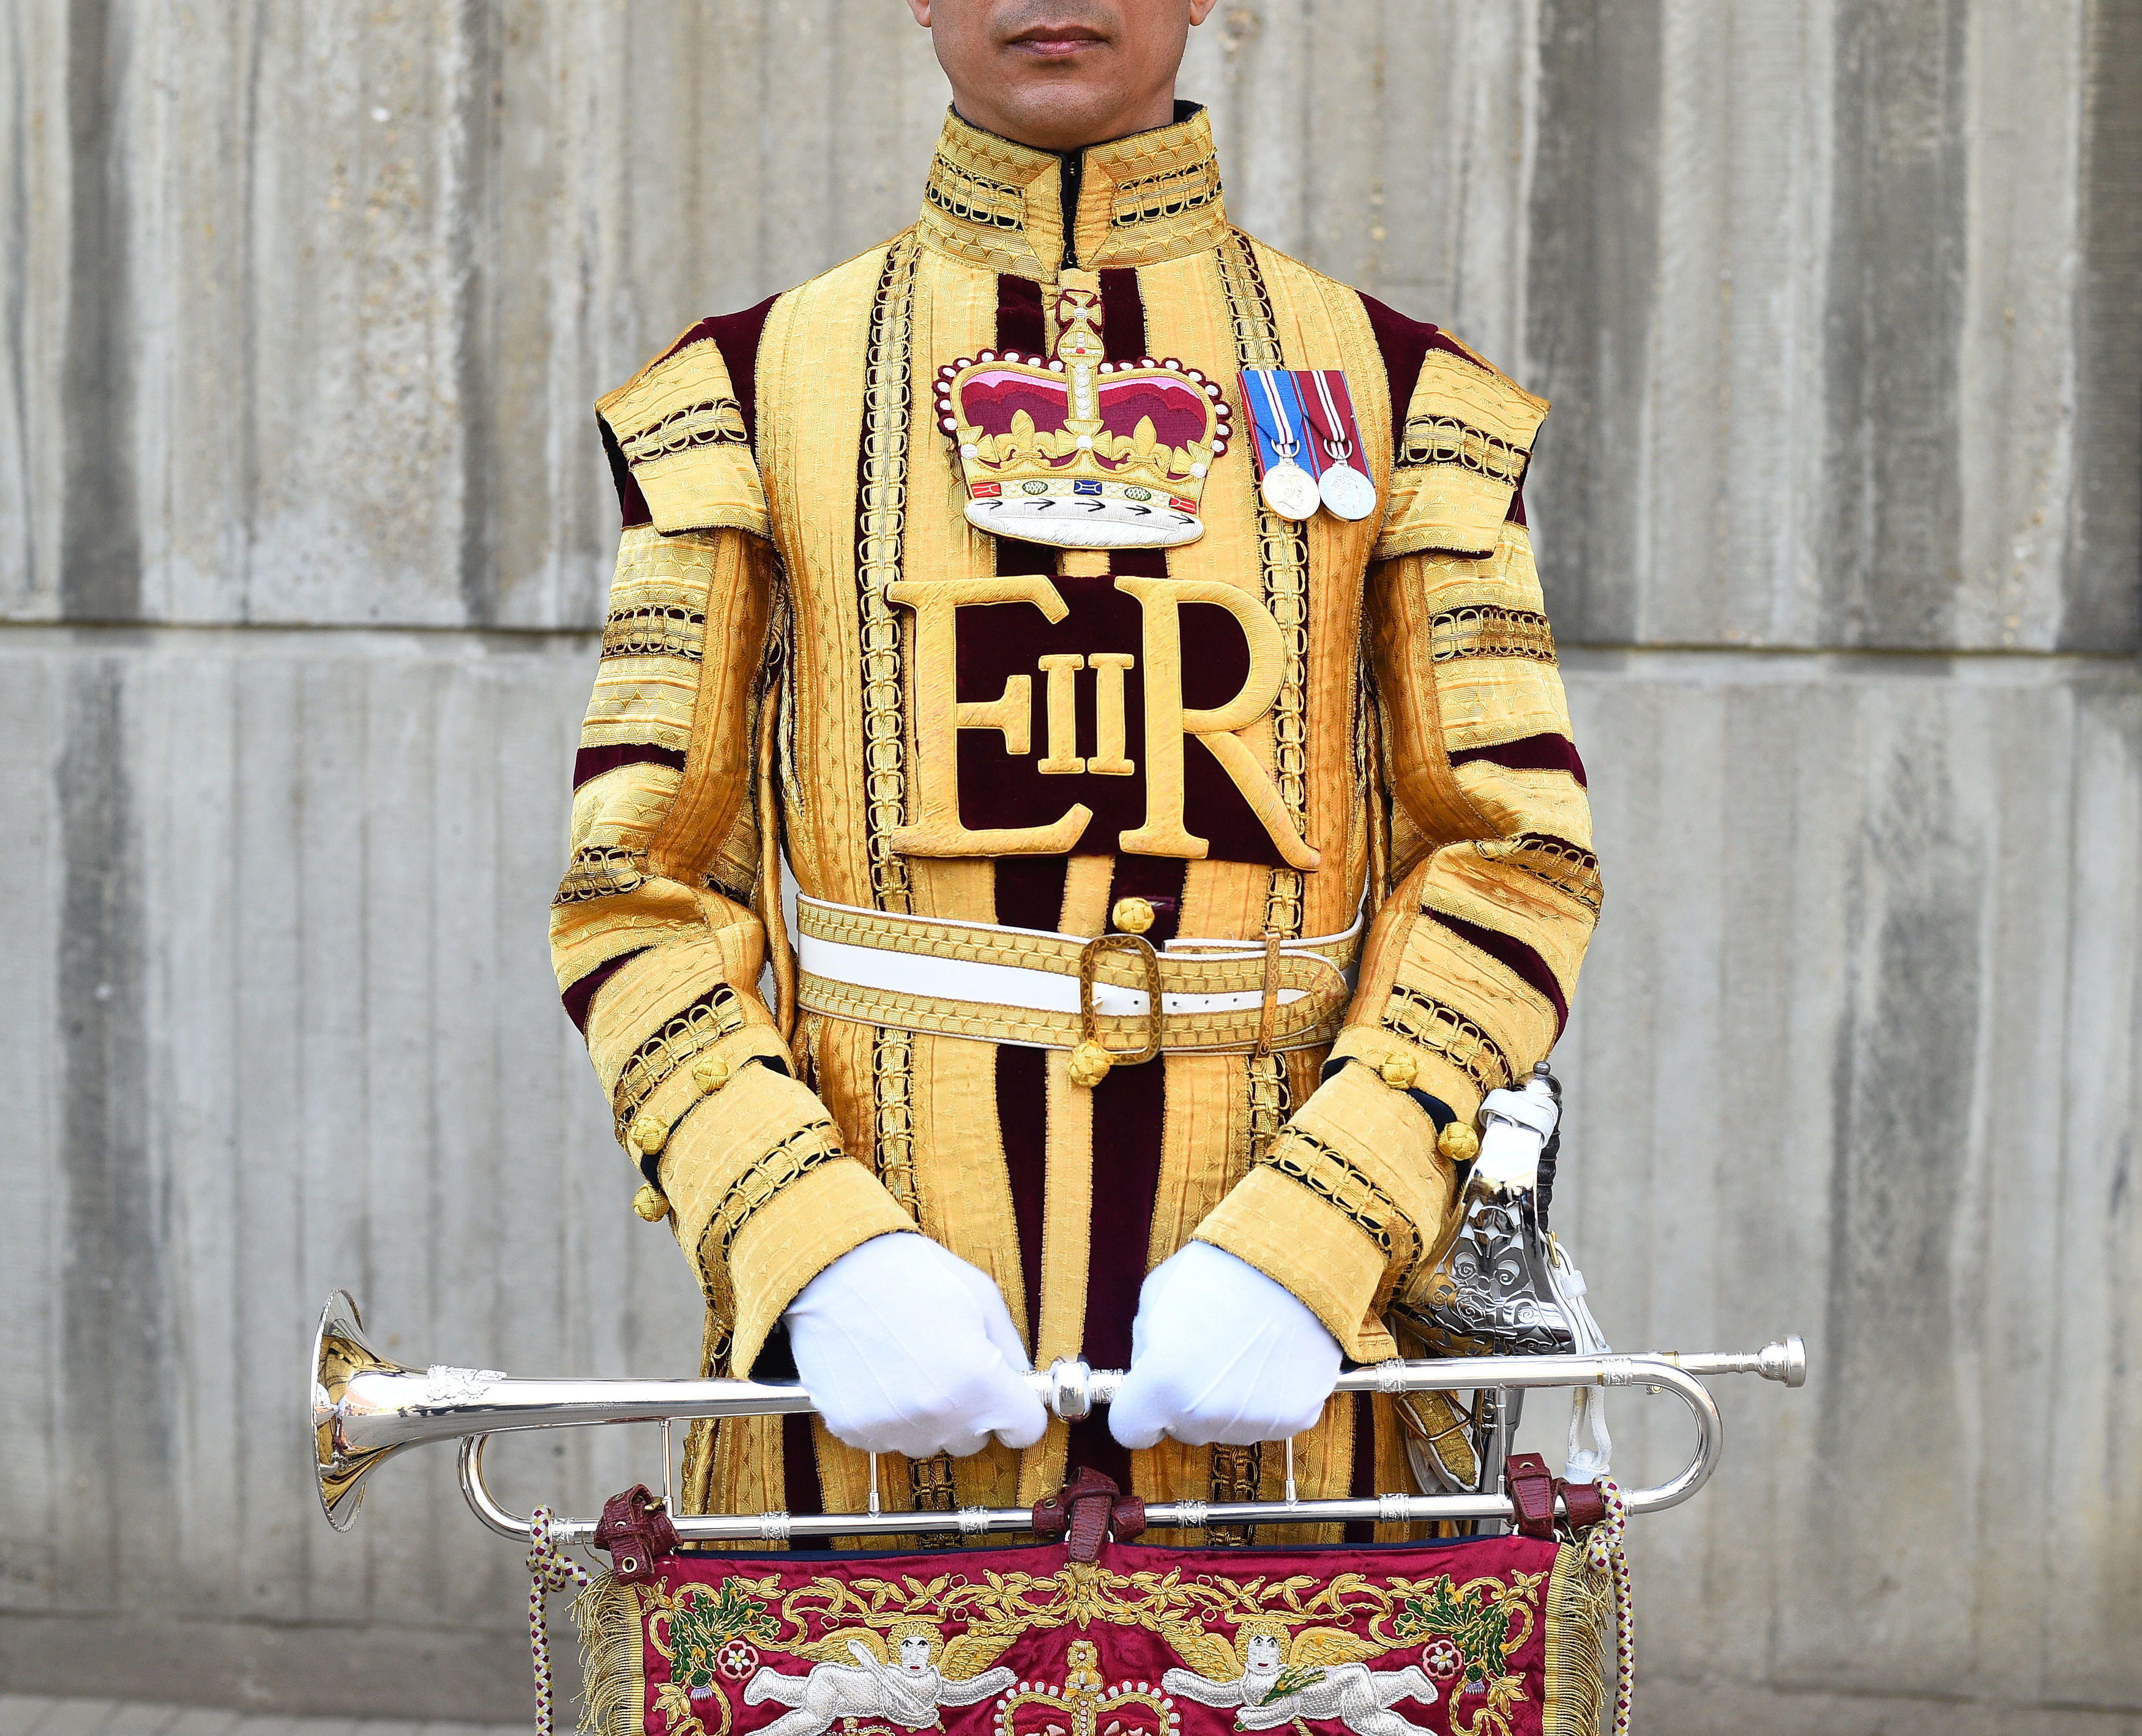 Detail of a state trumpeter's uniform (Kirsty O'Connor/PA)